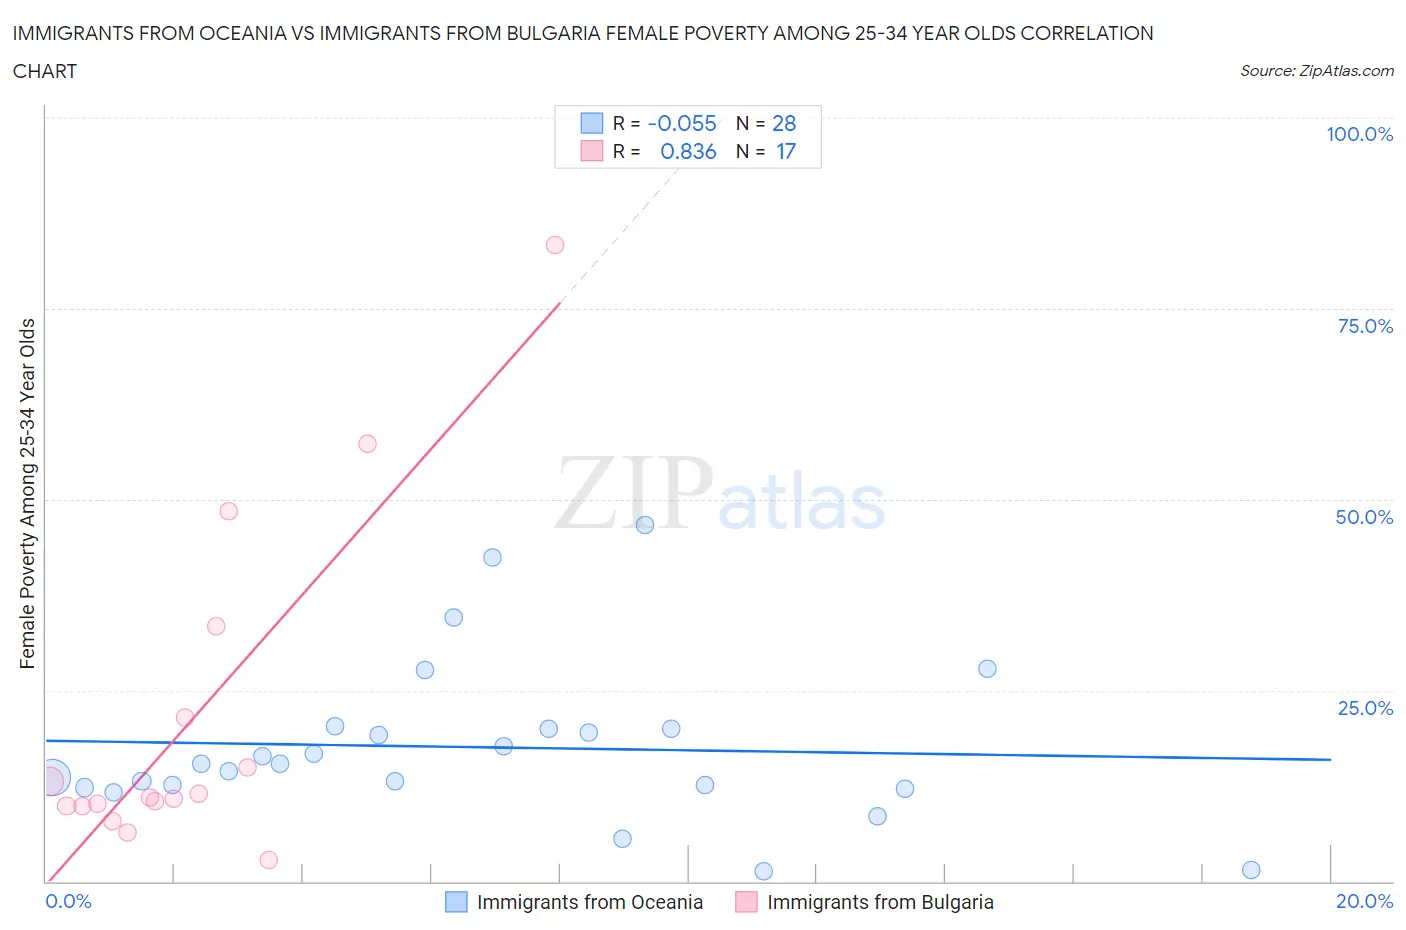 Immigrants from Oceania vs Immigrants from Bulgaria Female Poverty Among 25-34 Year Olds